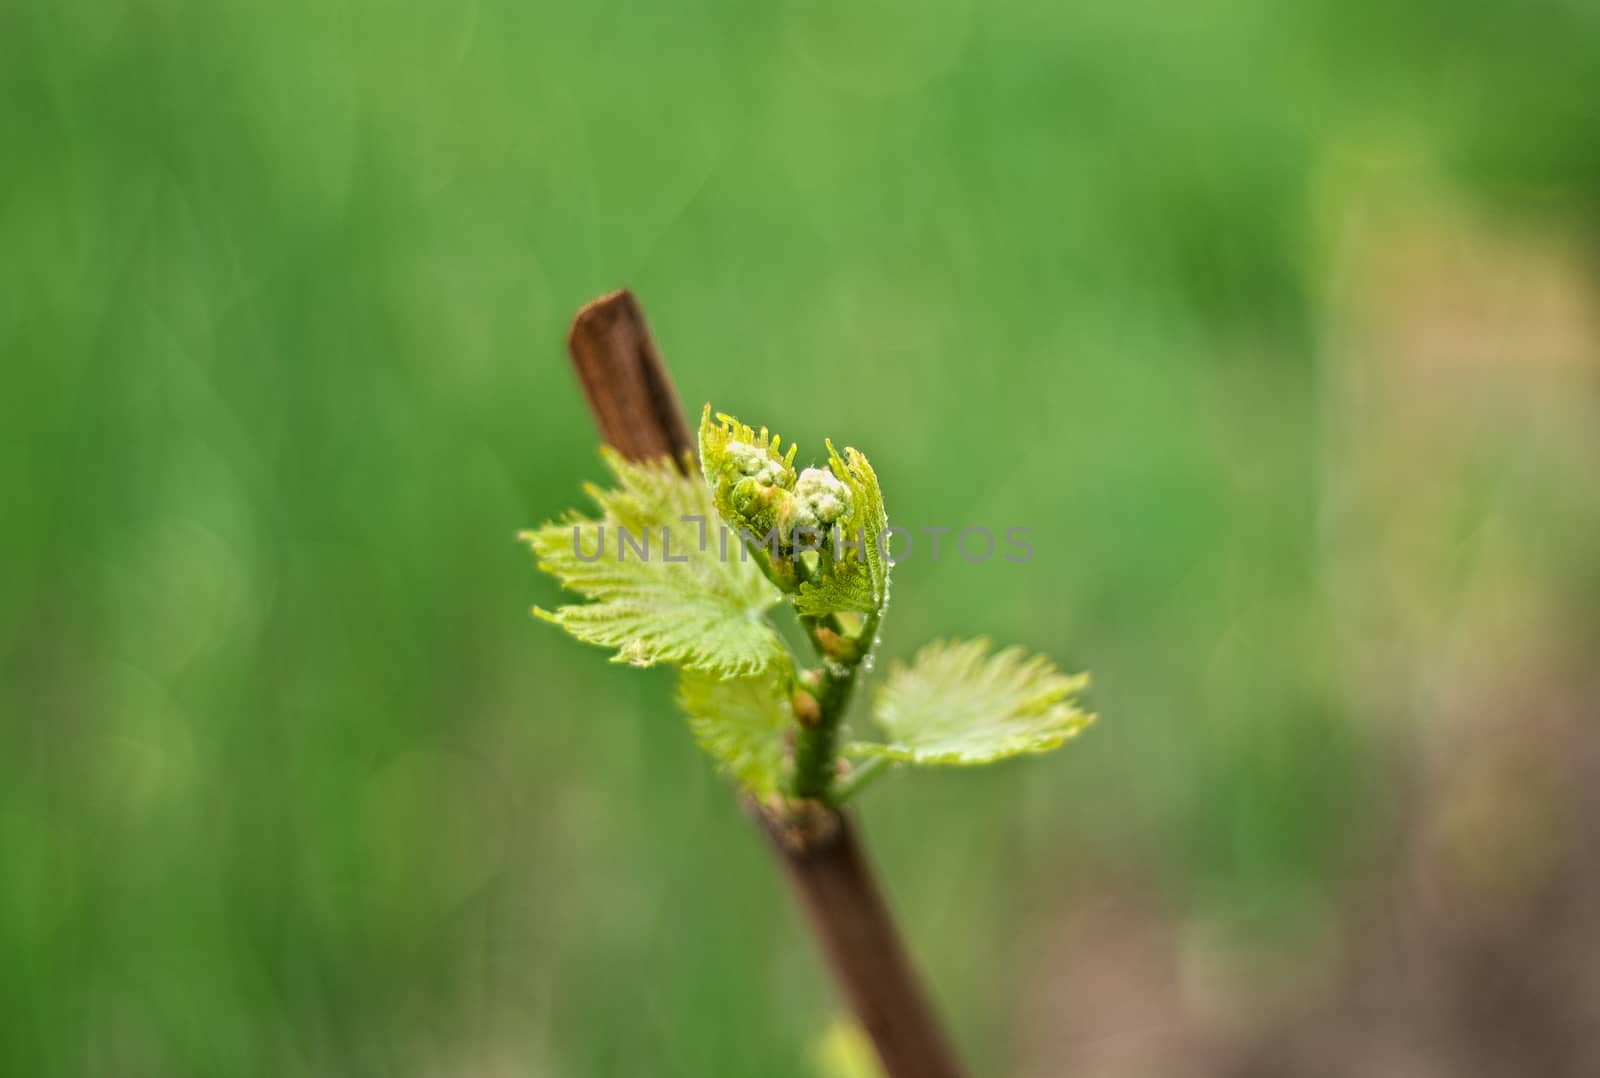 Grapevine starting vegetation in early spring, closeup by sheriffkule